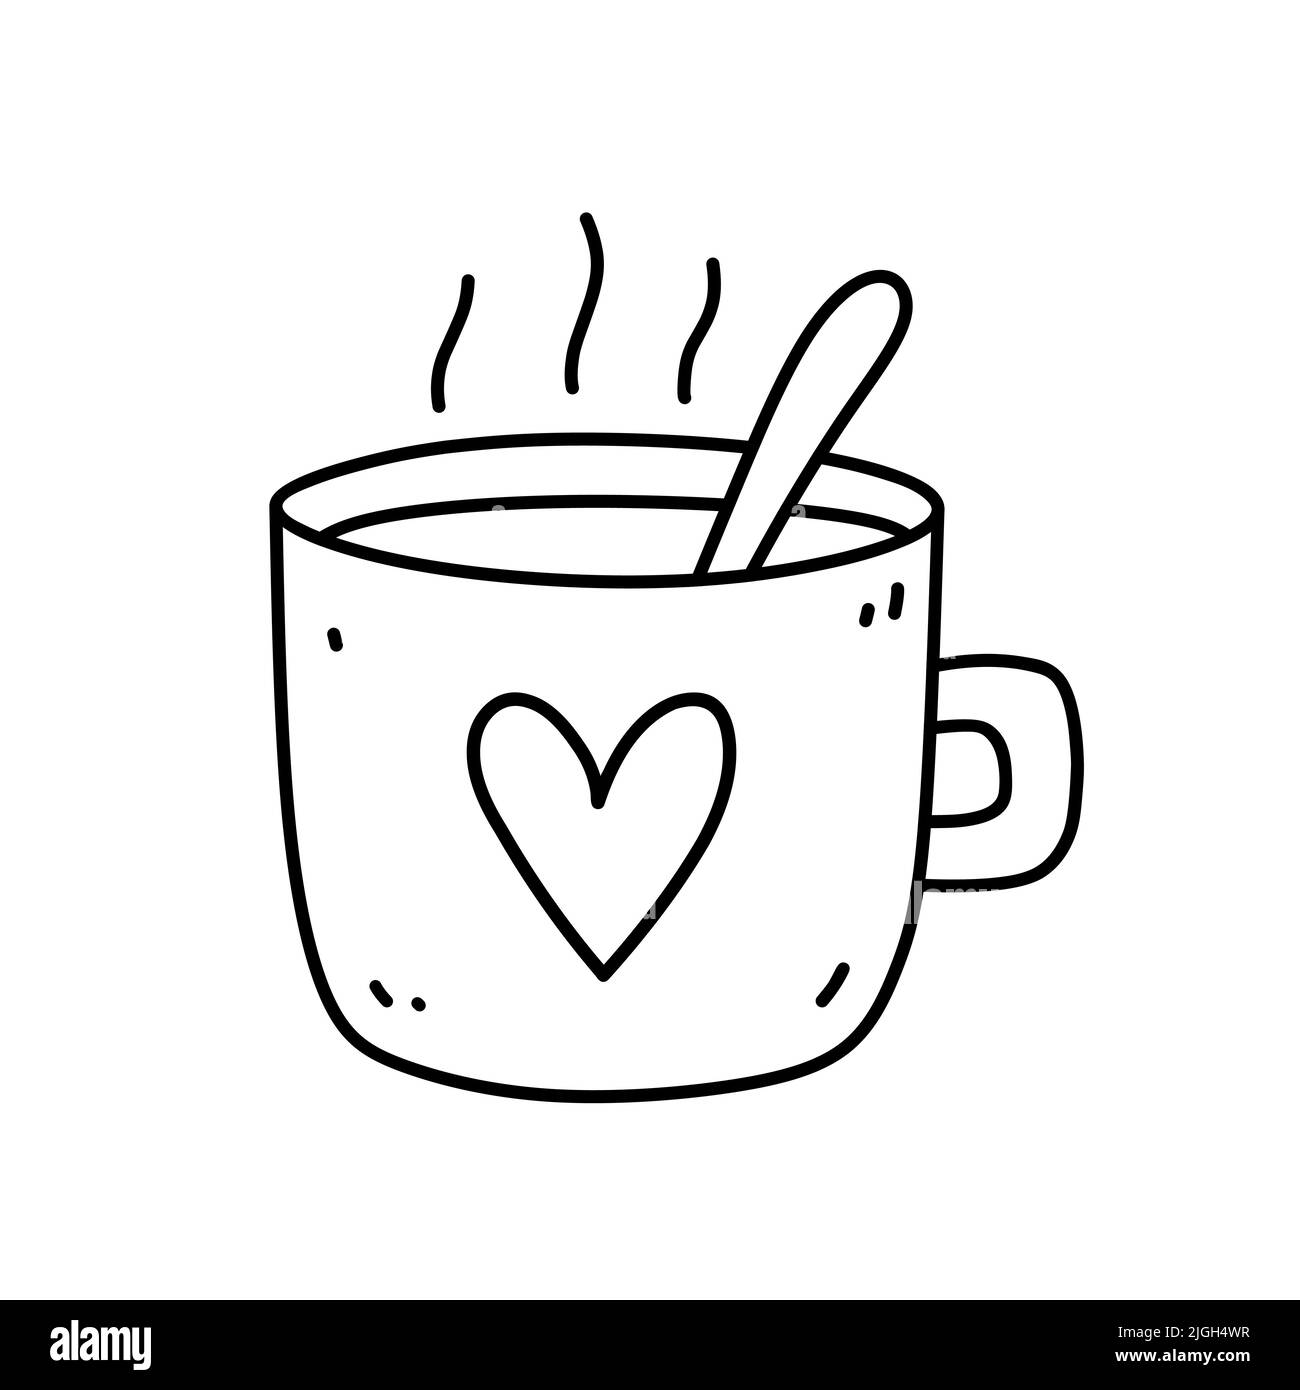 https://c8.alamy.com/comp/2JGH4WR/cute-cup-of-hot-coffee-with-spoon-isolated-on-white-background-vector-hand-drawn-illustration-in-doodle-style-perfect-for-cards-menu-logo-decorations-2JGH4WR.jpg